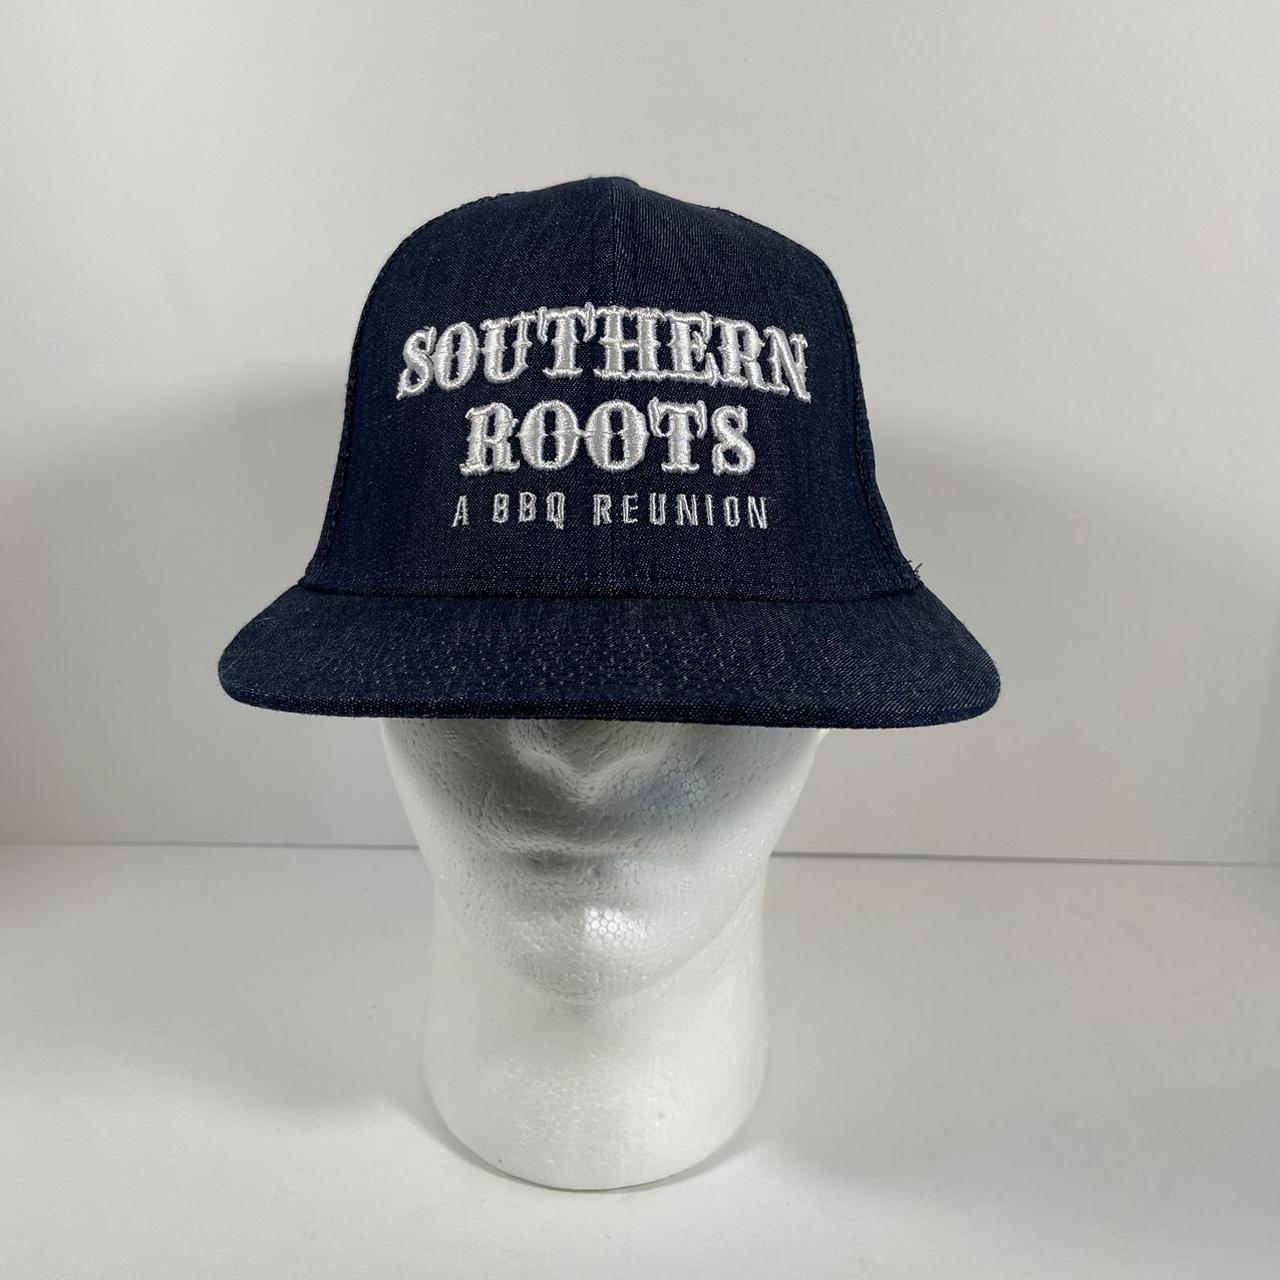 Roots Men's Blue and White Hat | Depop